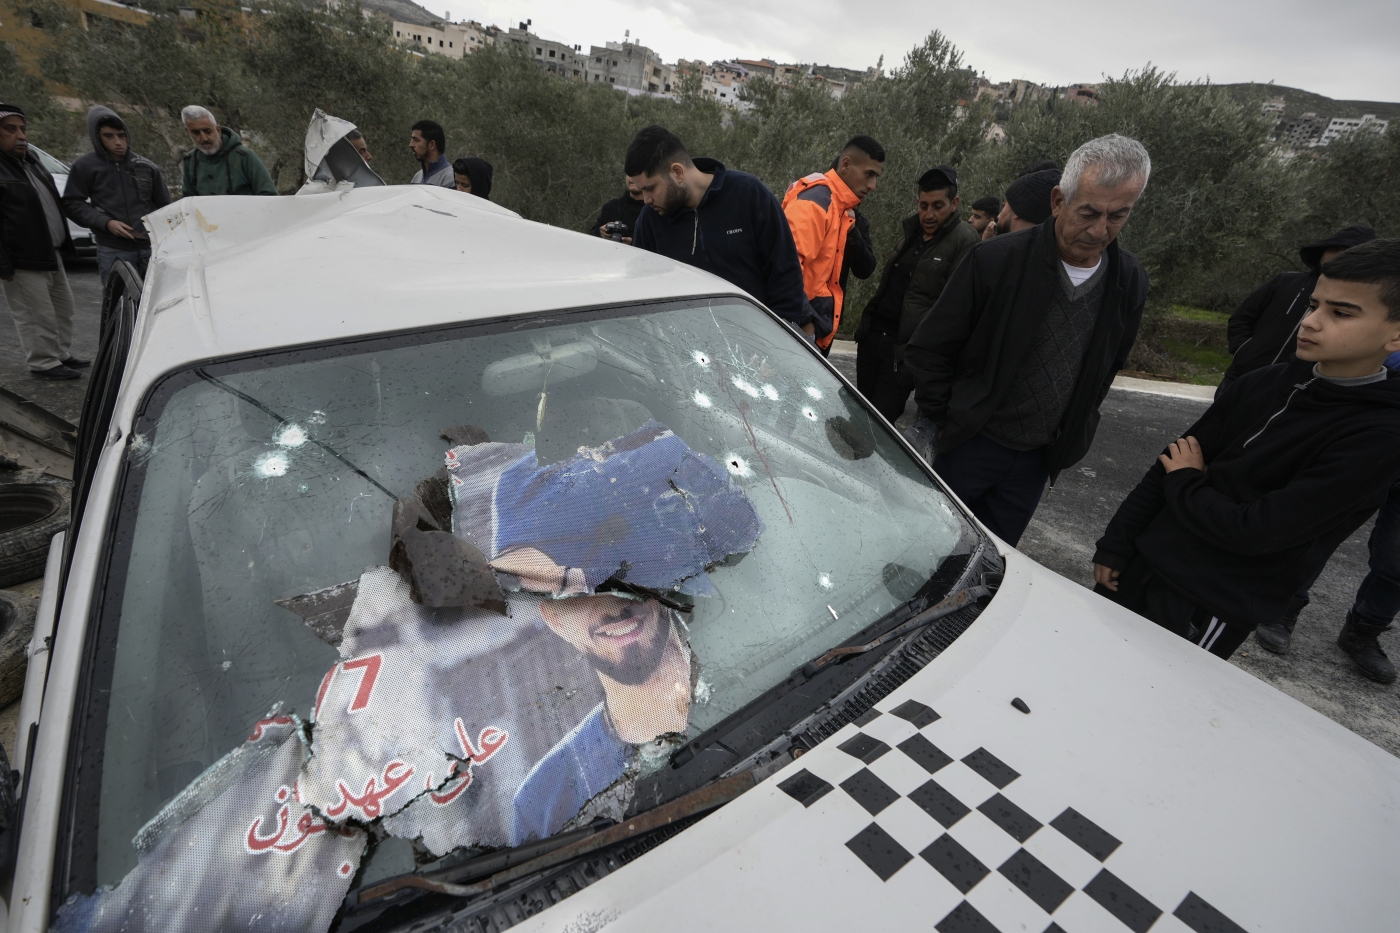 Palestinians inspect a car in which two men were shot dead by Israeli forces in the occupied West Bank village of Jaba on 14 January 2023 (AP)